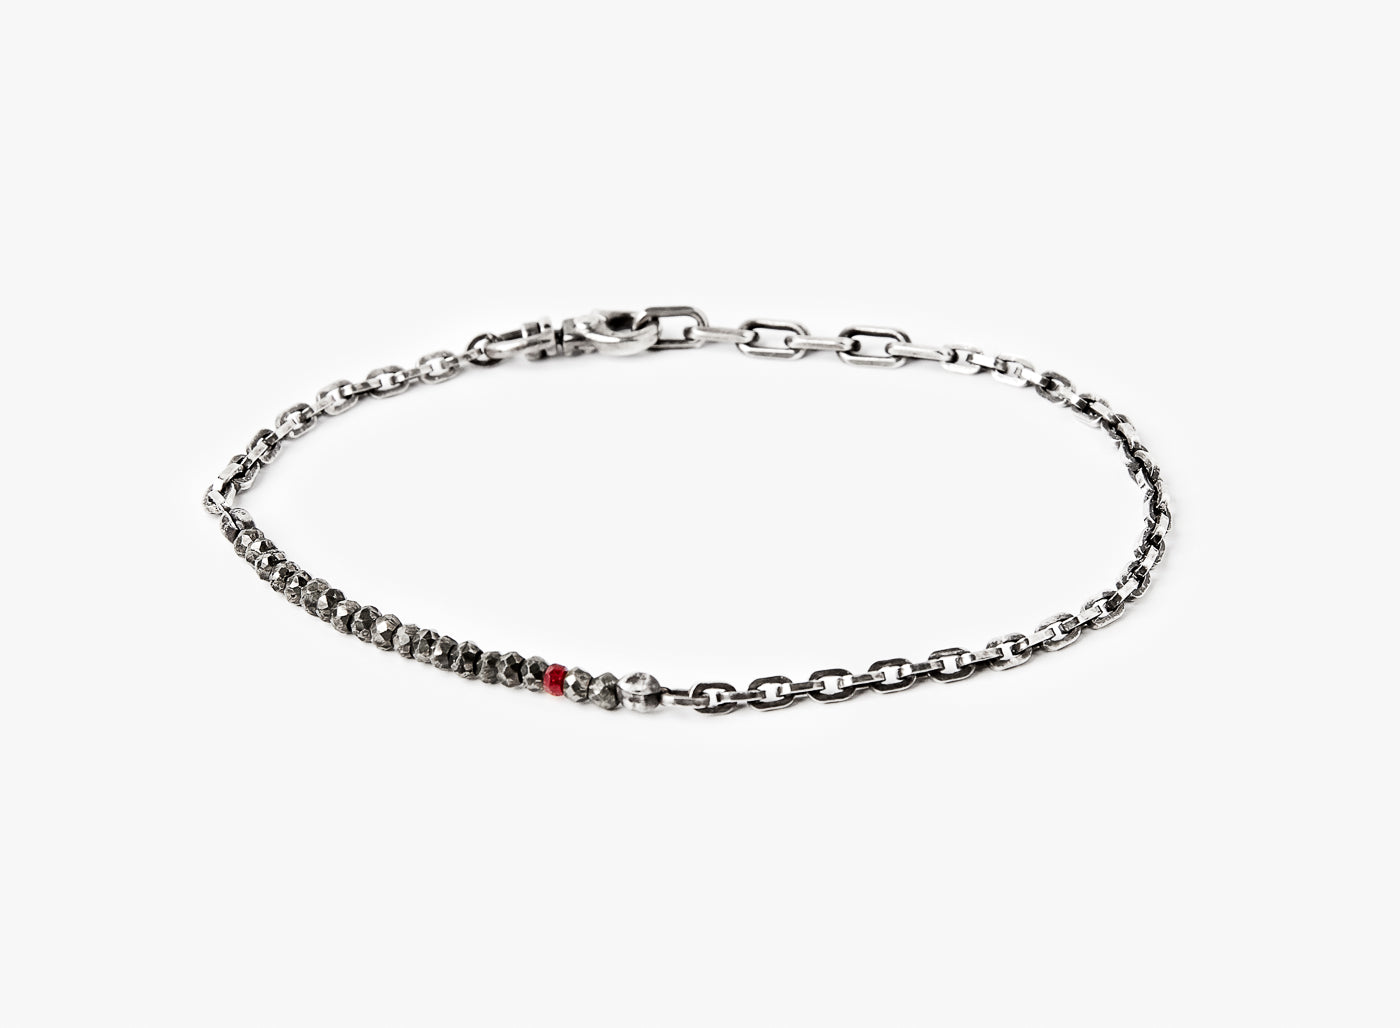 BEADED STONES BRACELET 308: this adjustable solid sterling flat cable chain connects to a strand of pyrite stones, finished with a single ruby